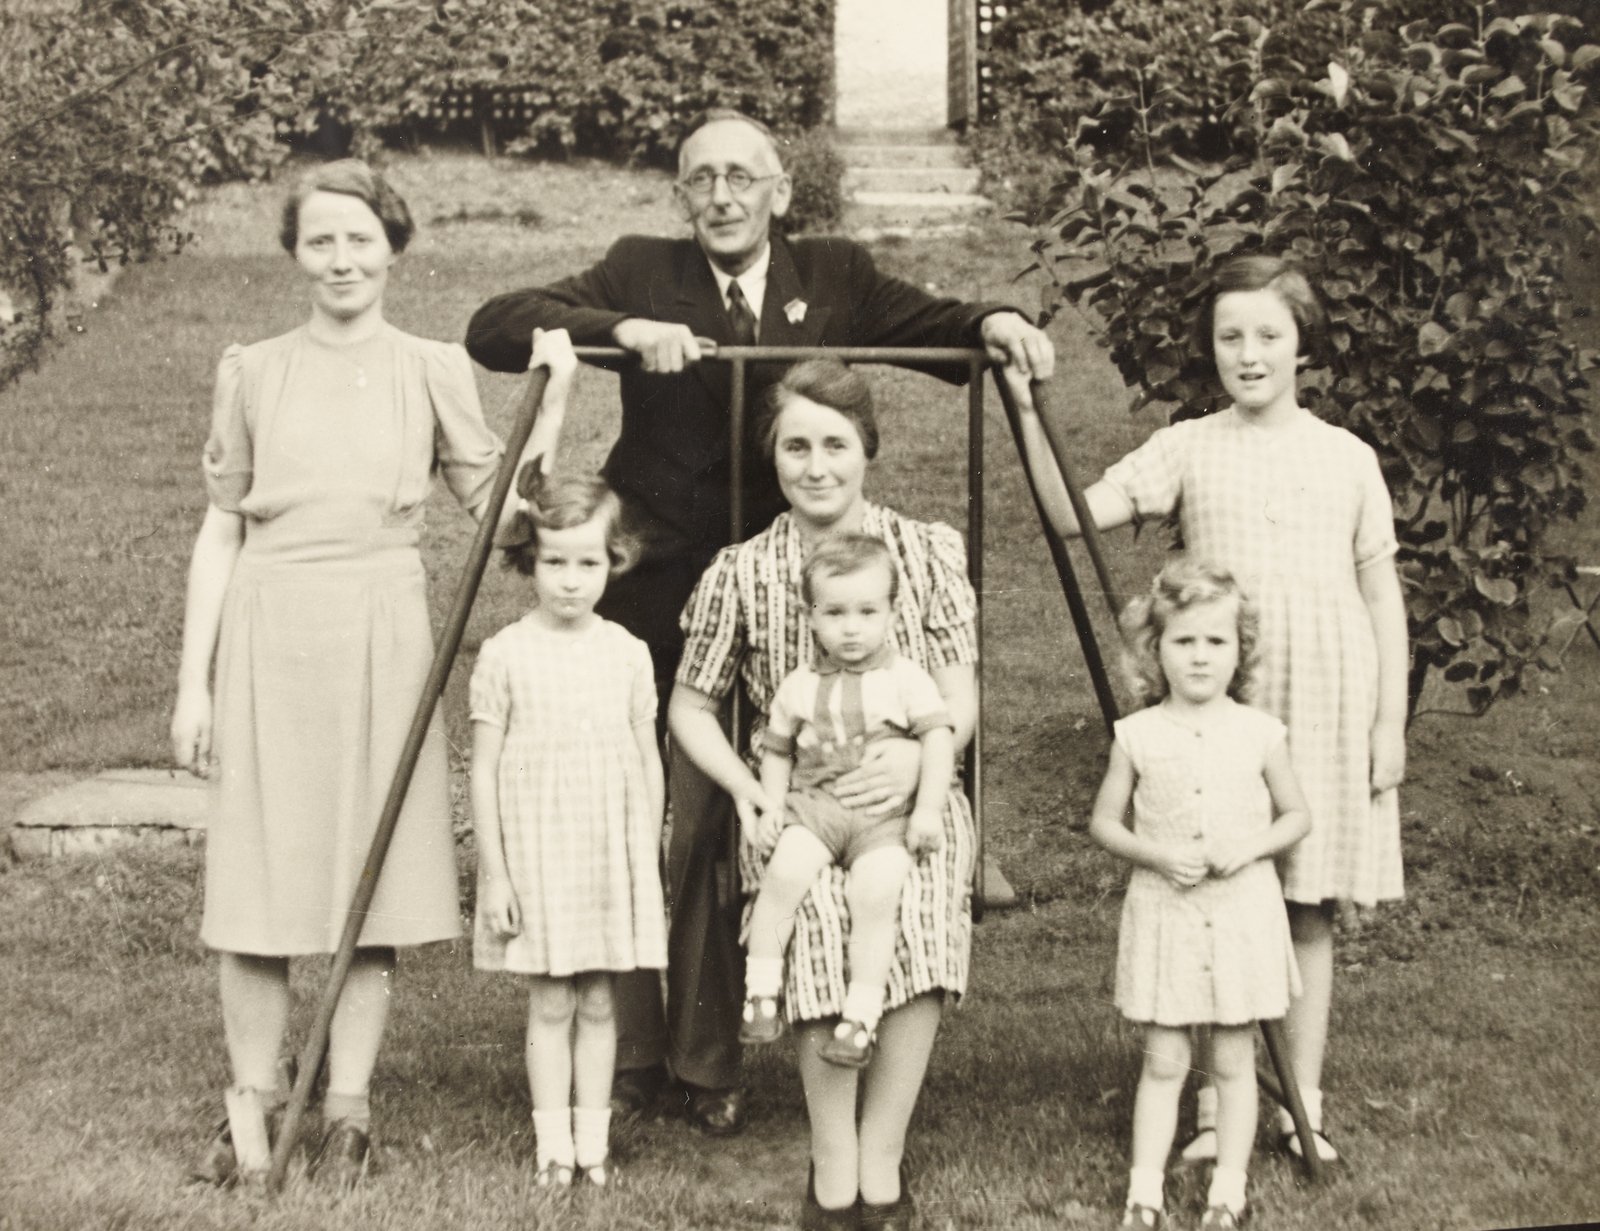 Image - W.D Hogan photographed with an unidentified group of women and children. Image courtesy of the National Library of Ireland